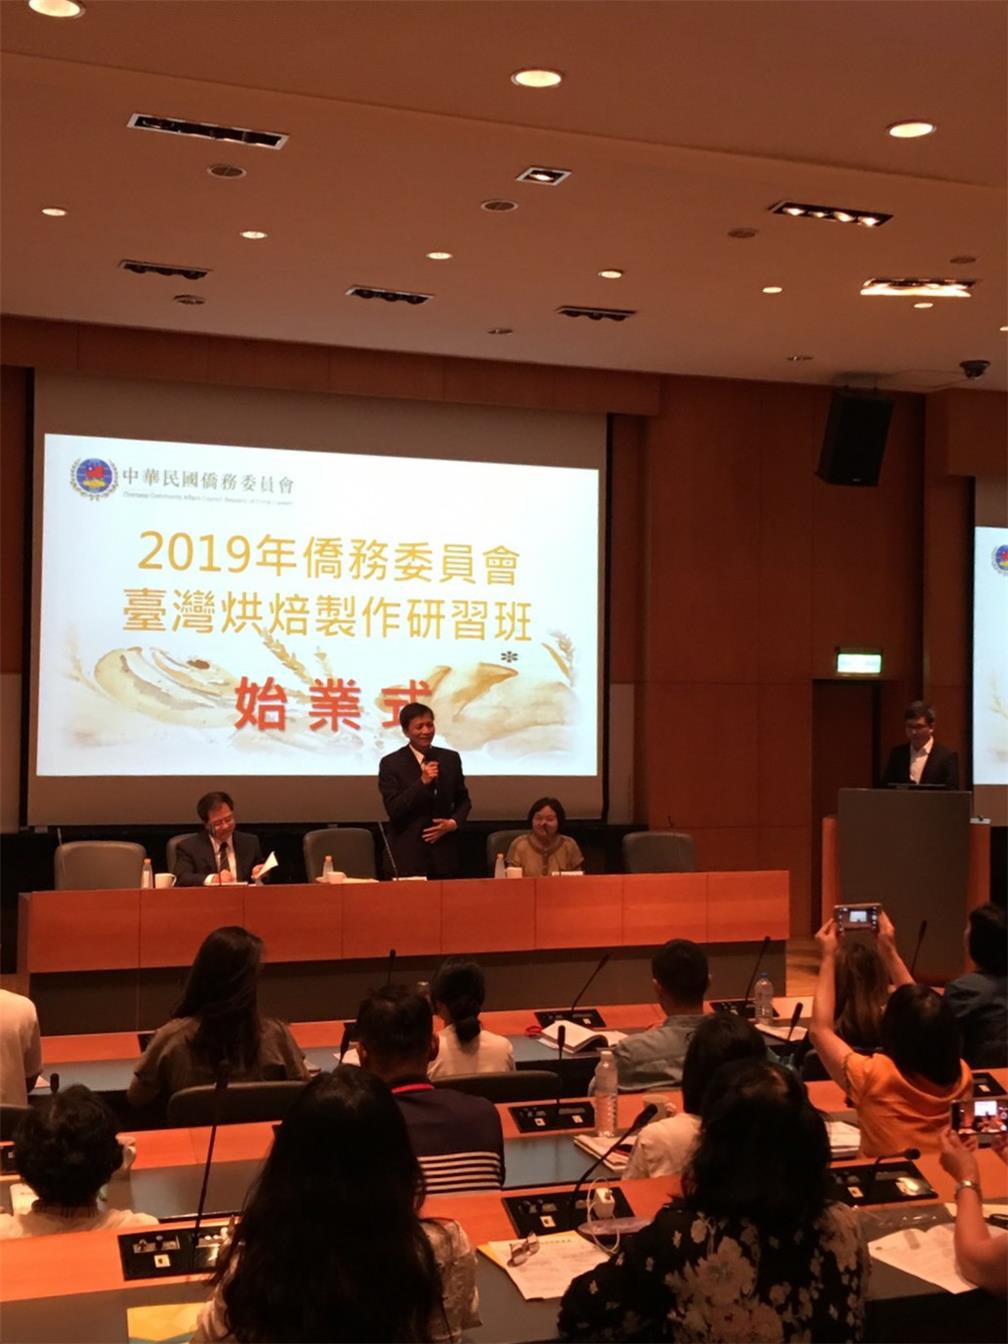 OCAC Deputy Minister Kao Chien-chih gave a speech to participants of the 2019 OCAC Taiwan Baking Workshop at the opening ceremnony.